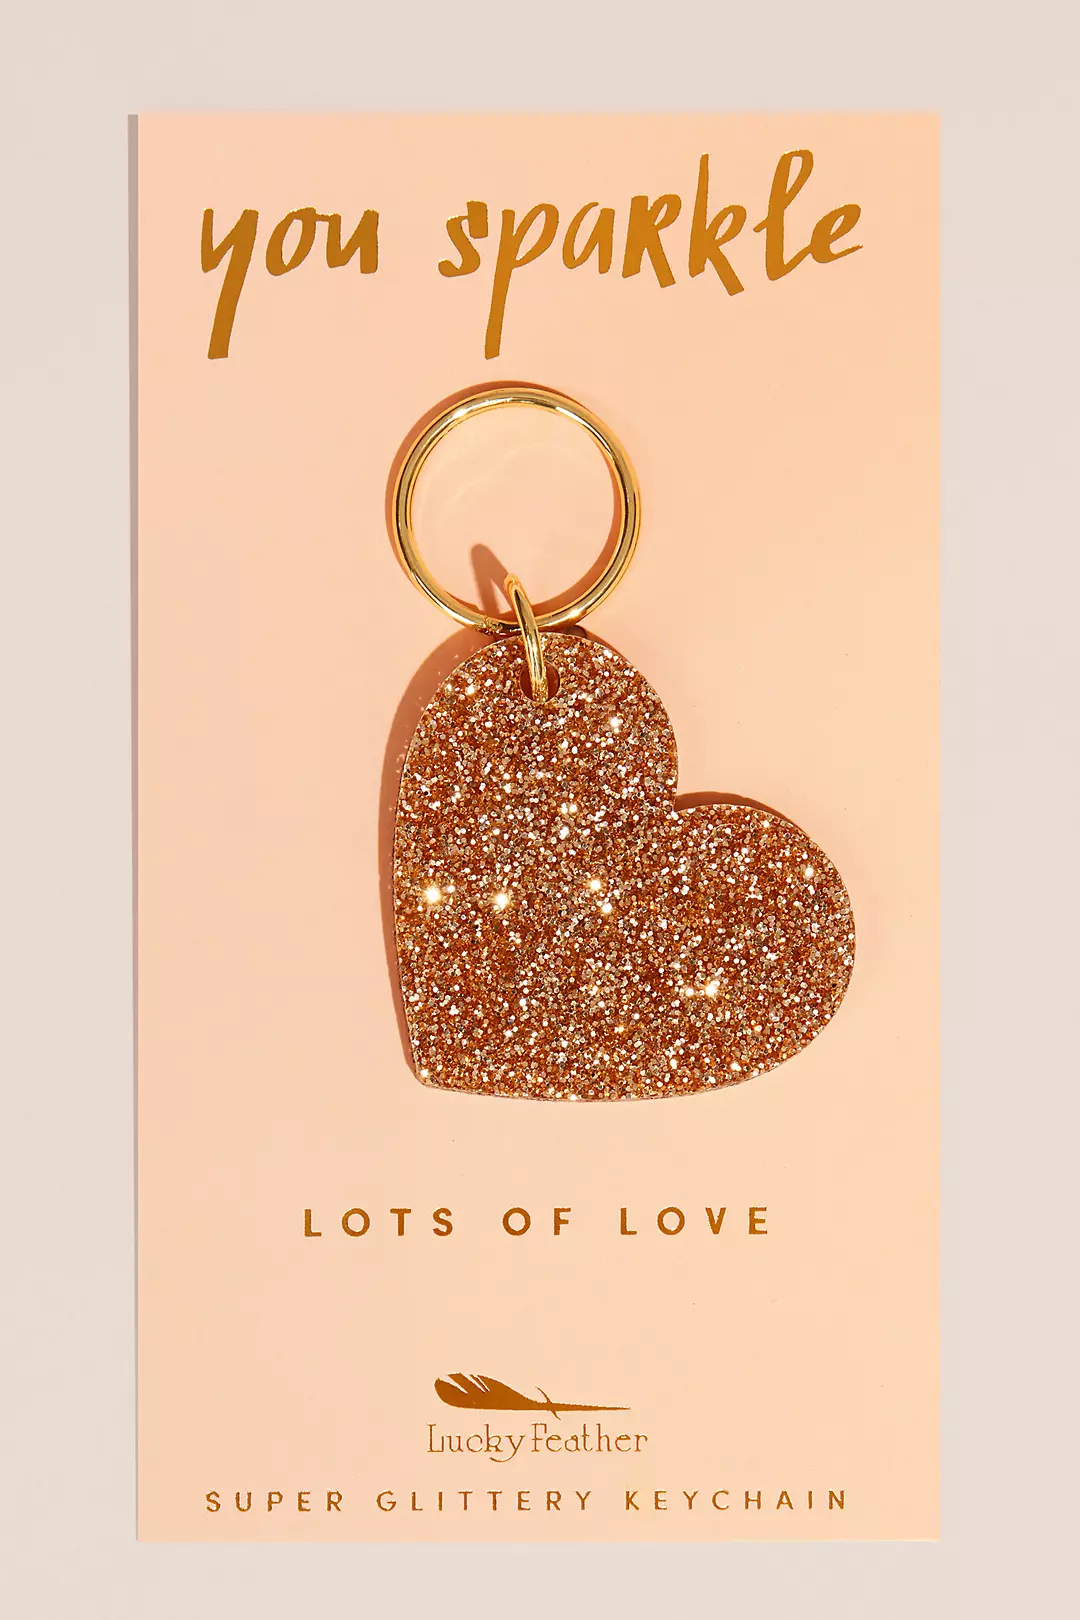 Purchase Wholesale glitter heart keychain. Free Returns & Net 60 Terms on  Faire